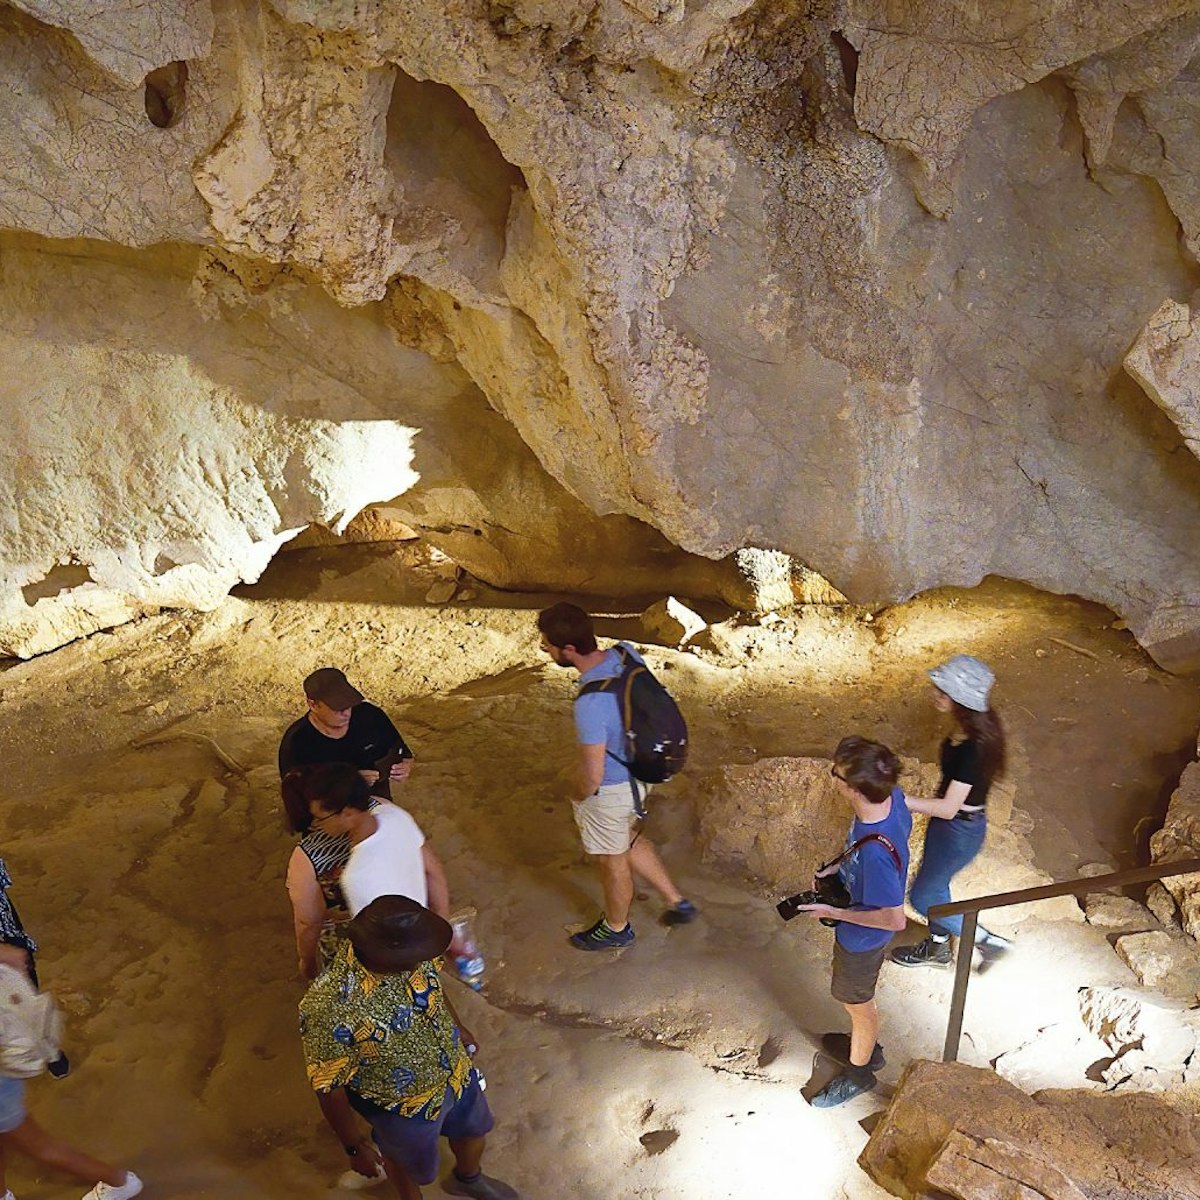 Queensland, Australia - December 2019: Tourists inside a cavern explore the ecosystem of the Capricorn Caves. Photography difficult due to very low light.